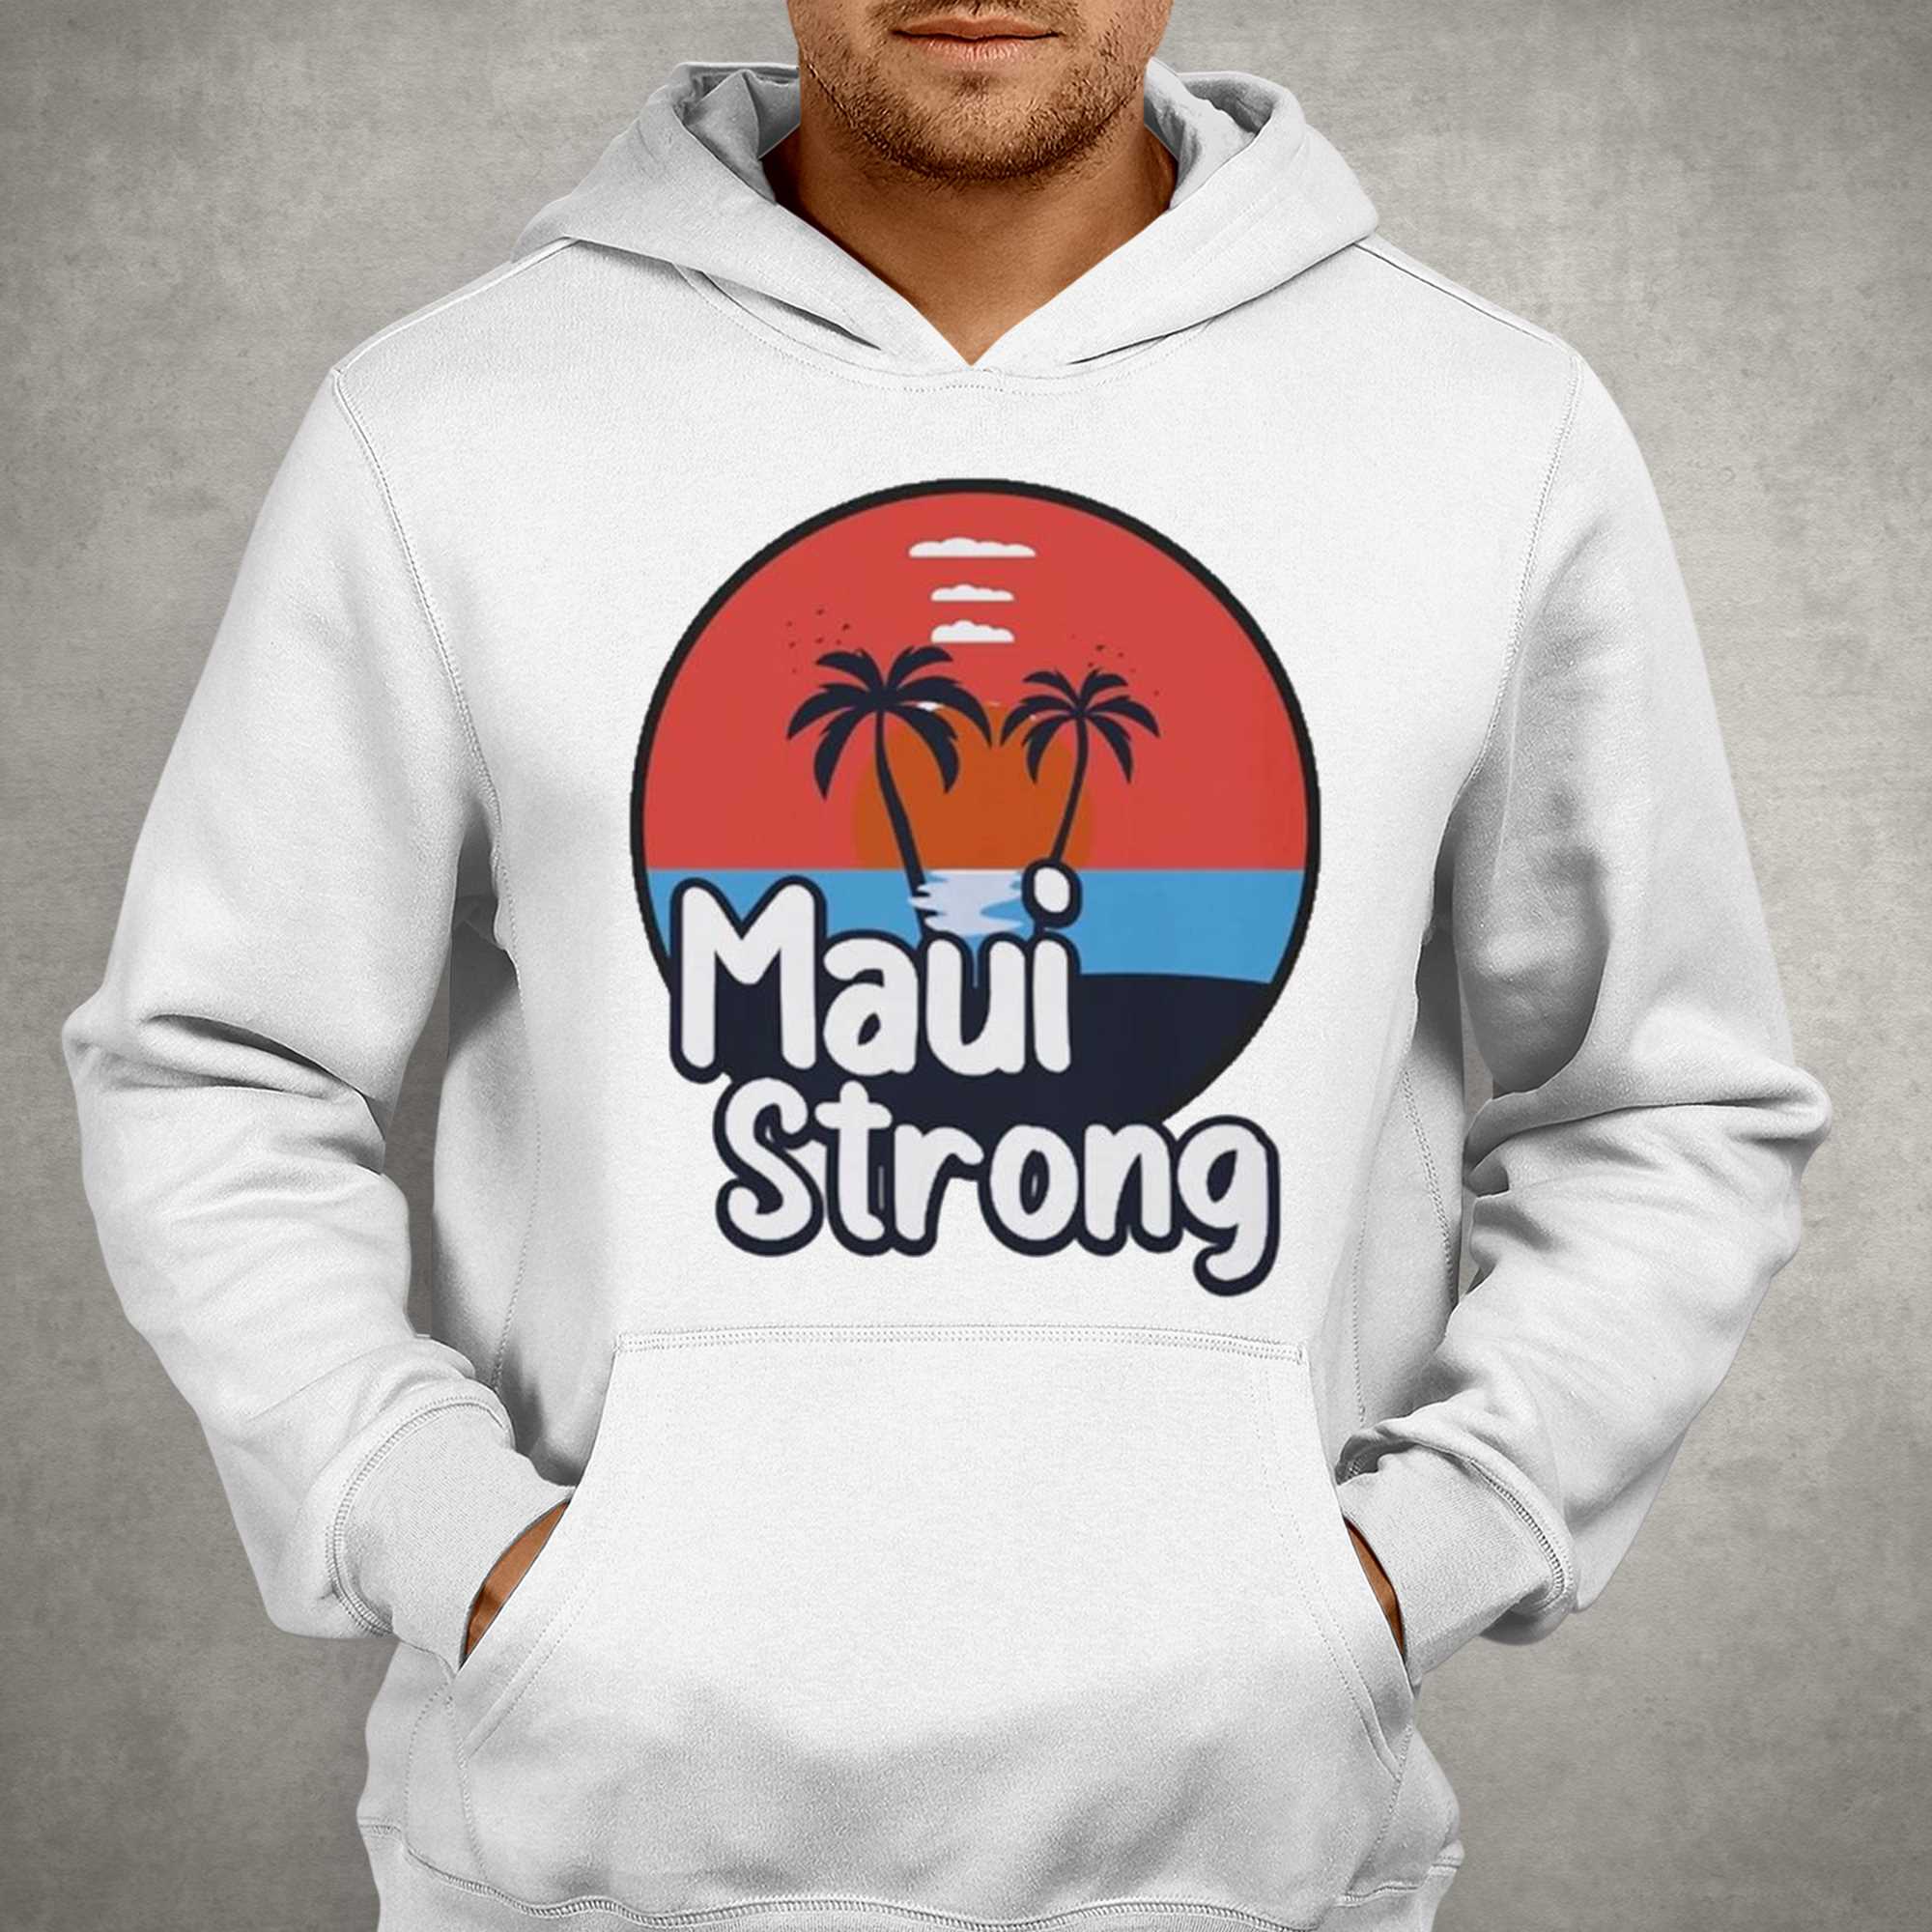 Why are the Rams wearing Maui shirts? Team selling gear to raise money for  Hawaii wildfire victims